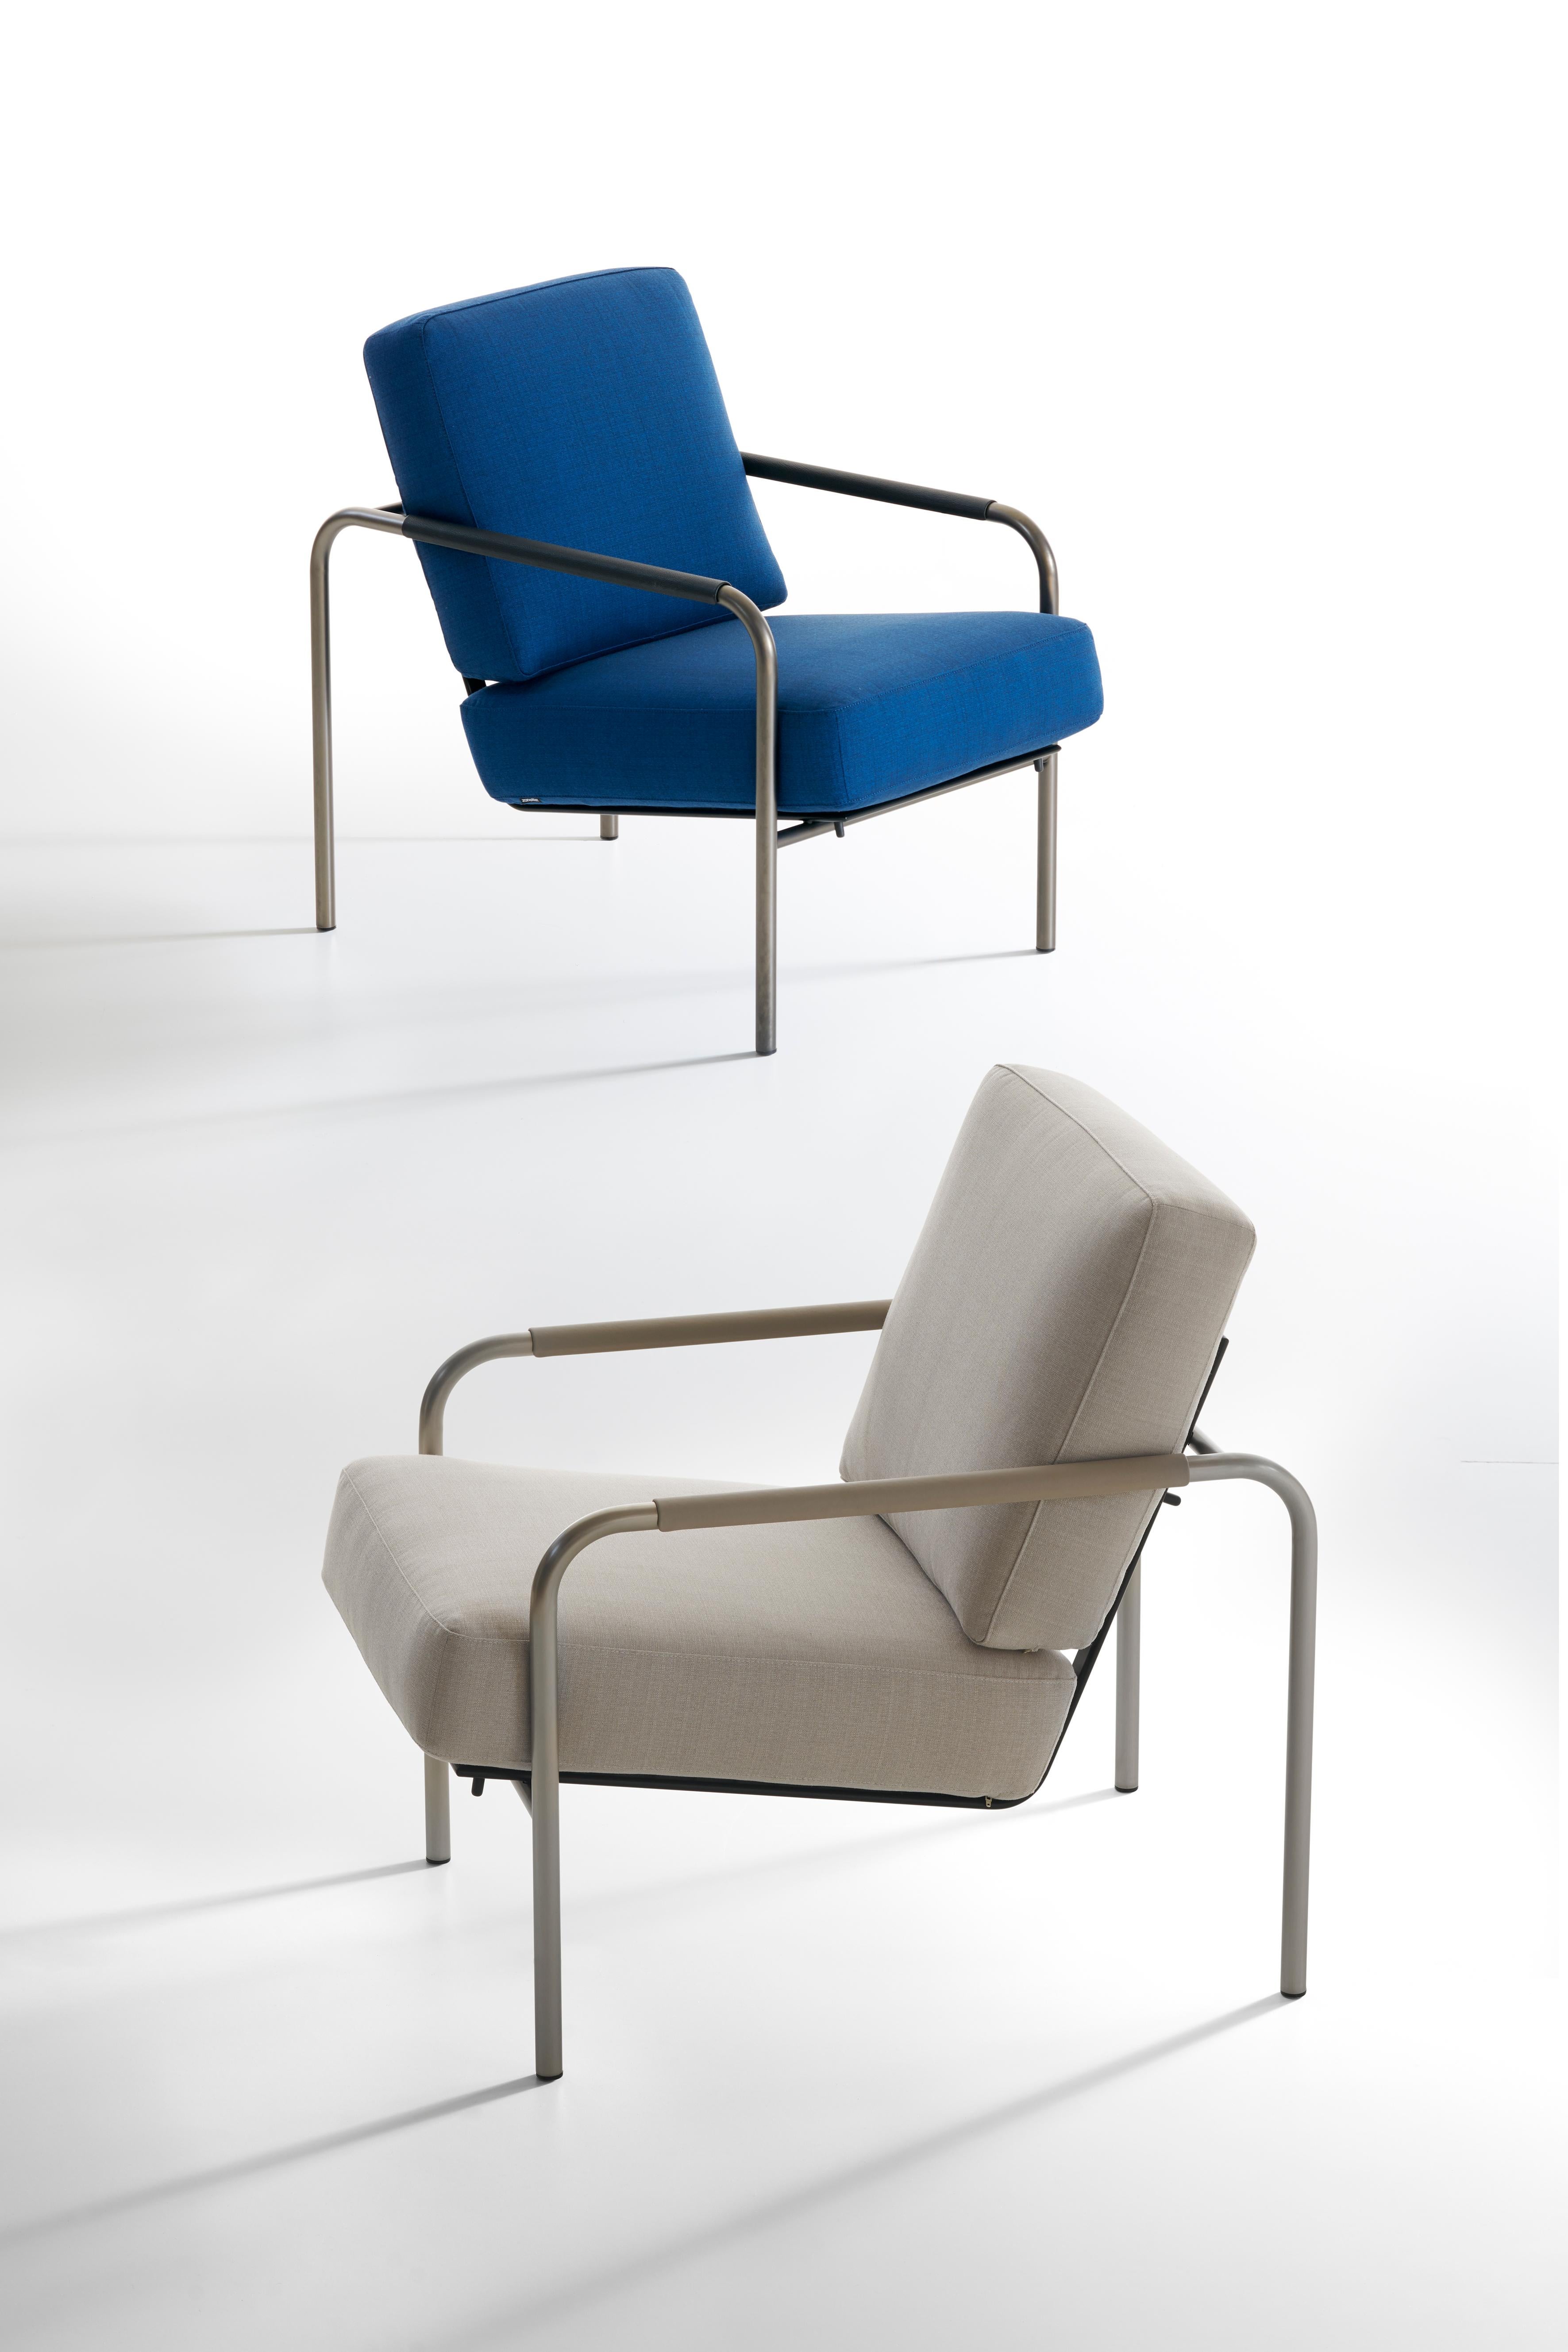 Zanotta Susanna Armchair in Victor 28101 Fabric & Nickel-Satin Finished Frame

Frame in chromium-plated, or in natural or black nickel- satin finished, or black painted tubular steel. Adjustable two- position cushion support in black painted